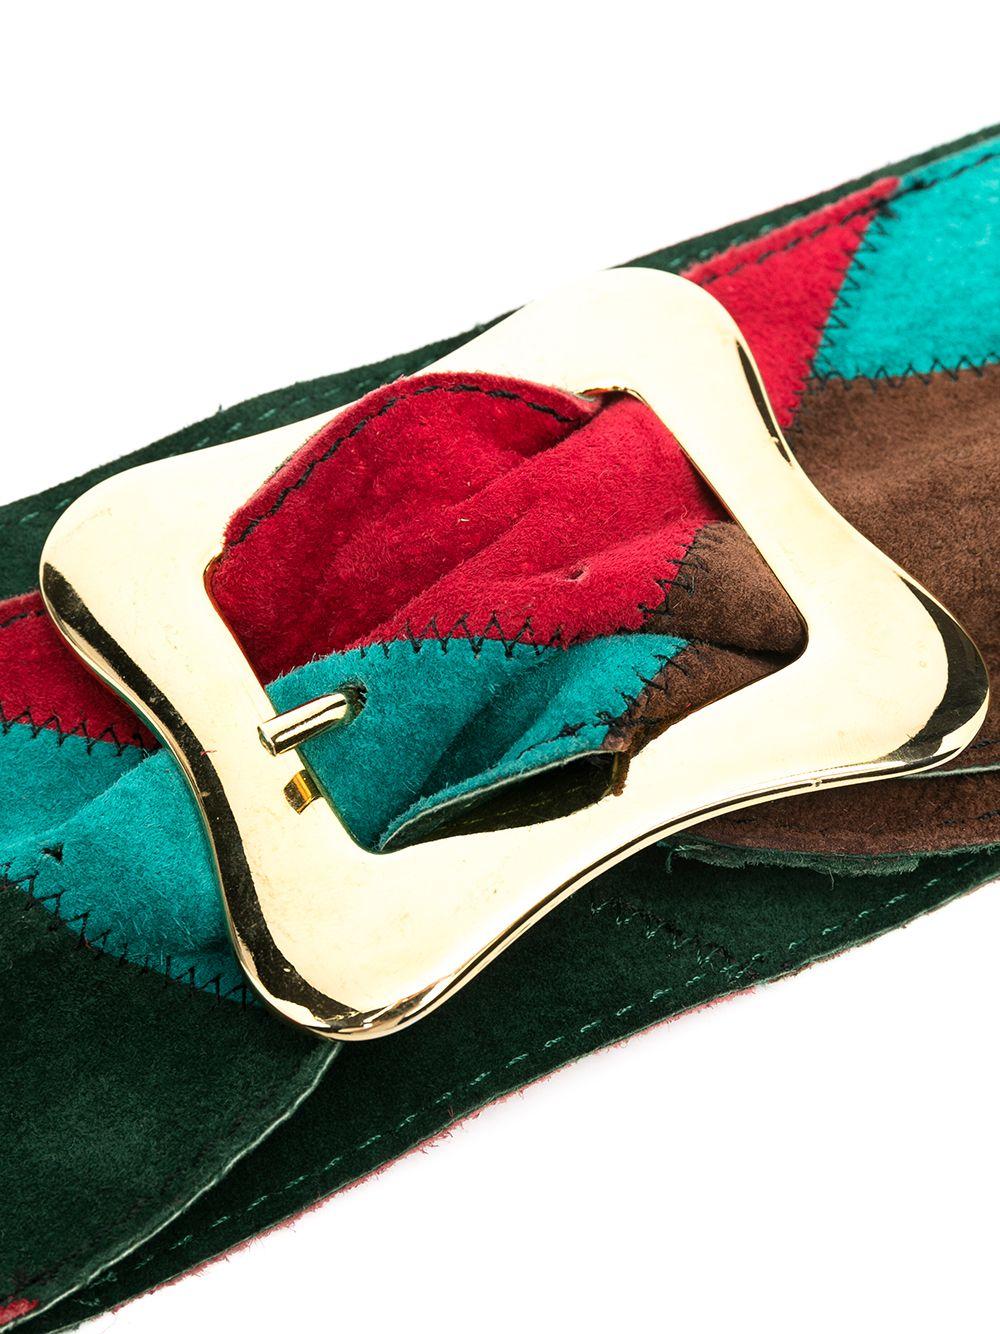 Shaded in bright autumnal tones of jade, red, forest green, brown and gold, this vintage Yves Saint Laurent belt was designed during the 1980s, when Saint Laurent was still at the helm of the brand. This belt exudes Saint Laurent's typically